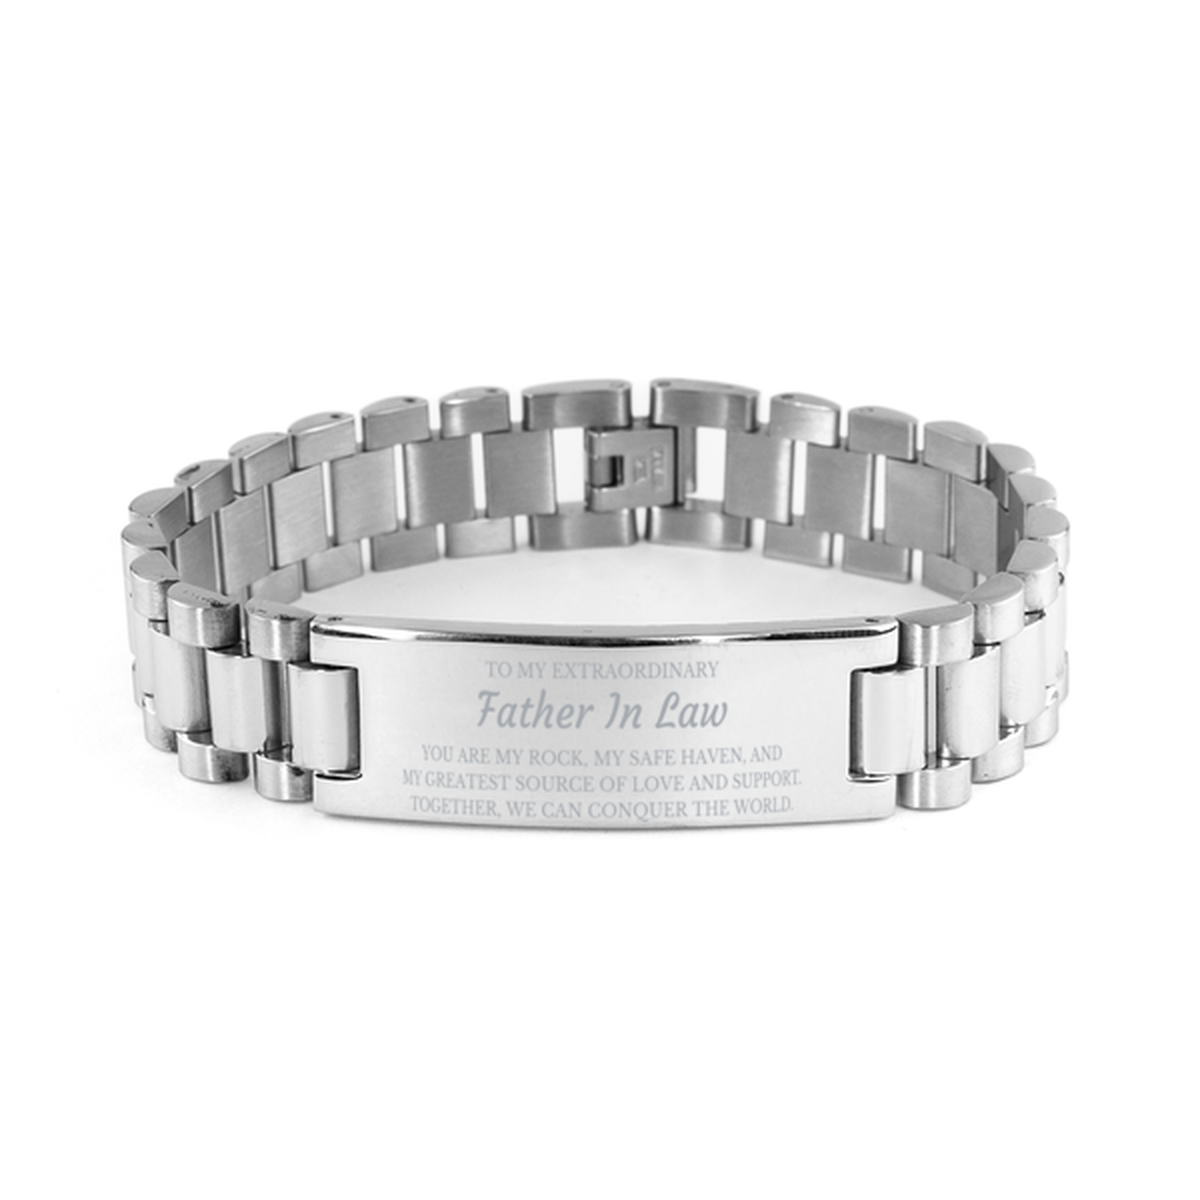 To My Extraordinary Father In Law Gifts, Together, we can conquer the world, Birthday Ladder Stainless Steel Bracelet For Father In Law, Christmas Gifts For Father In Law